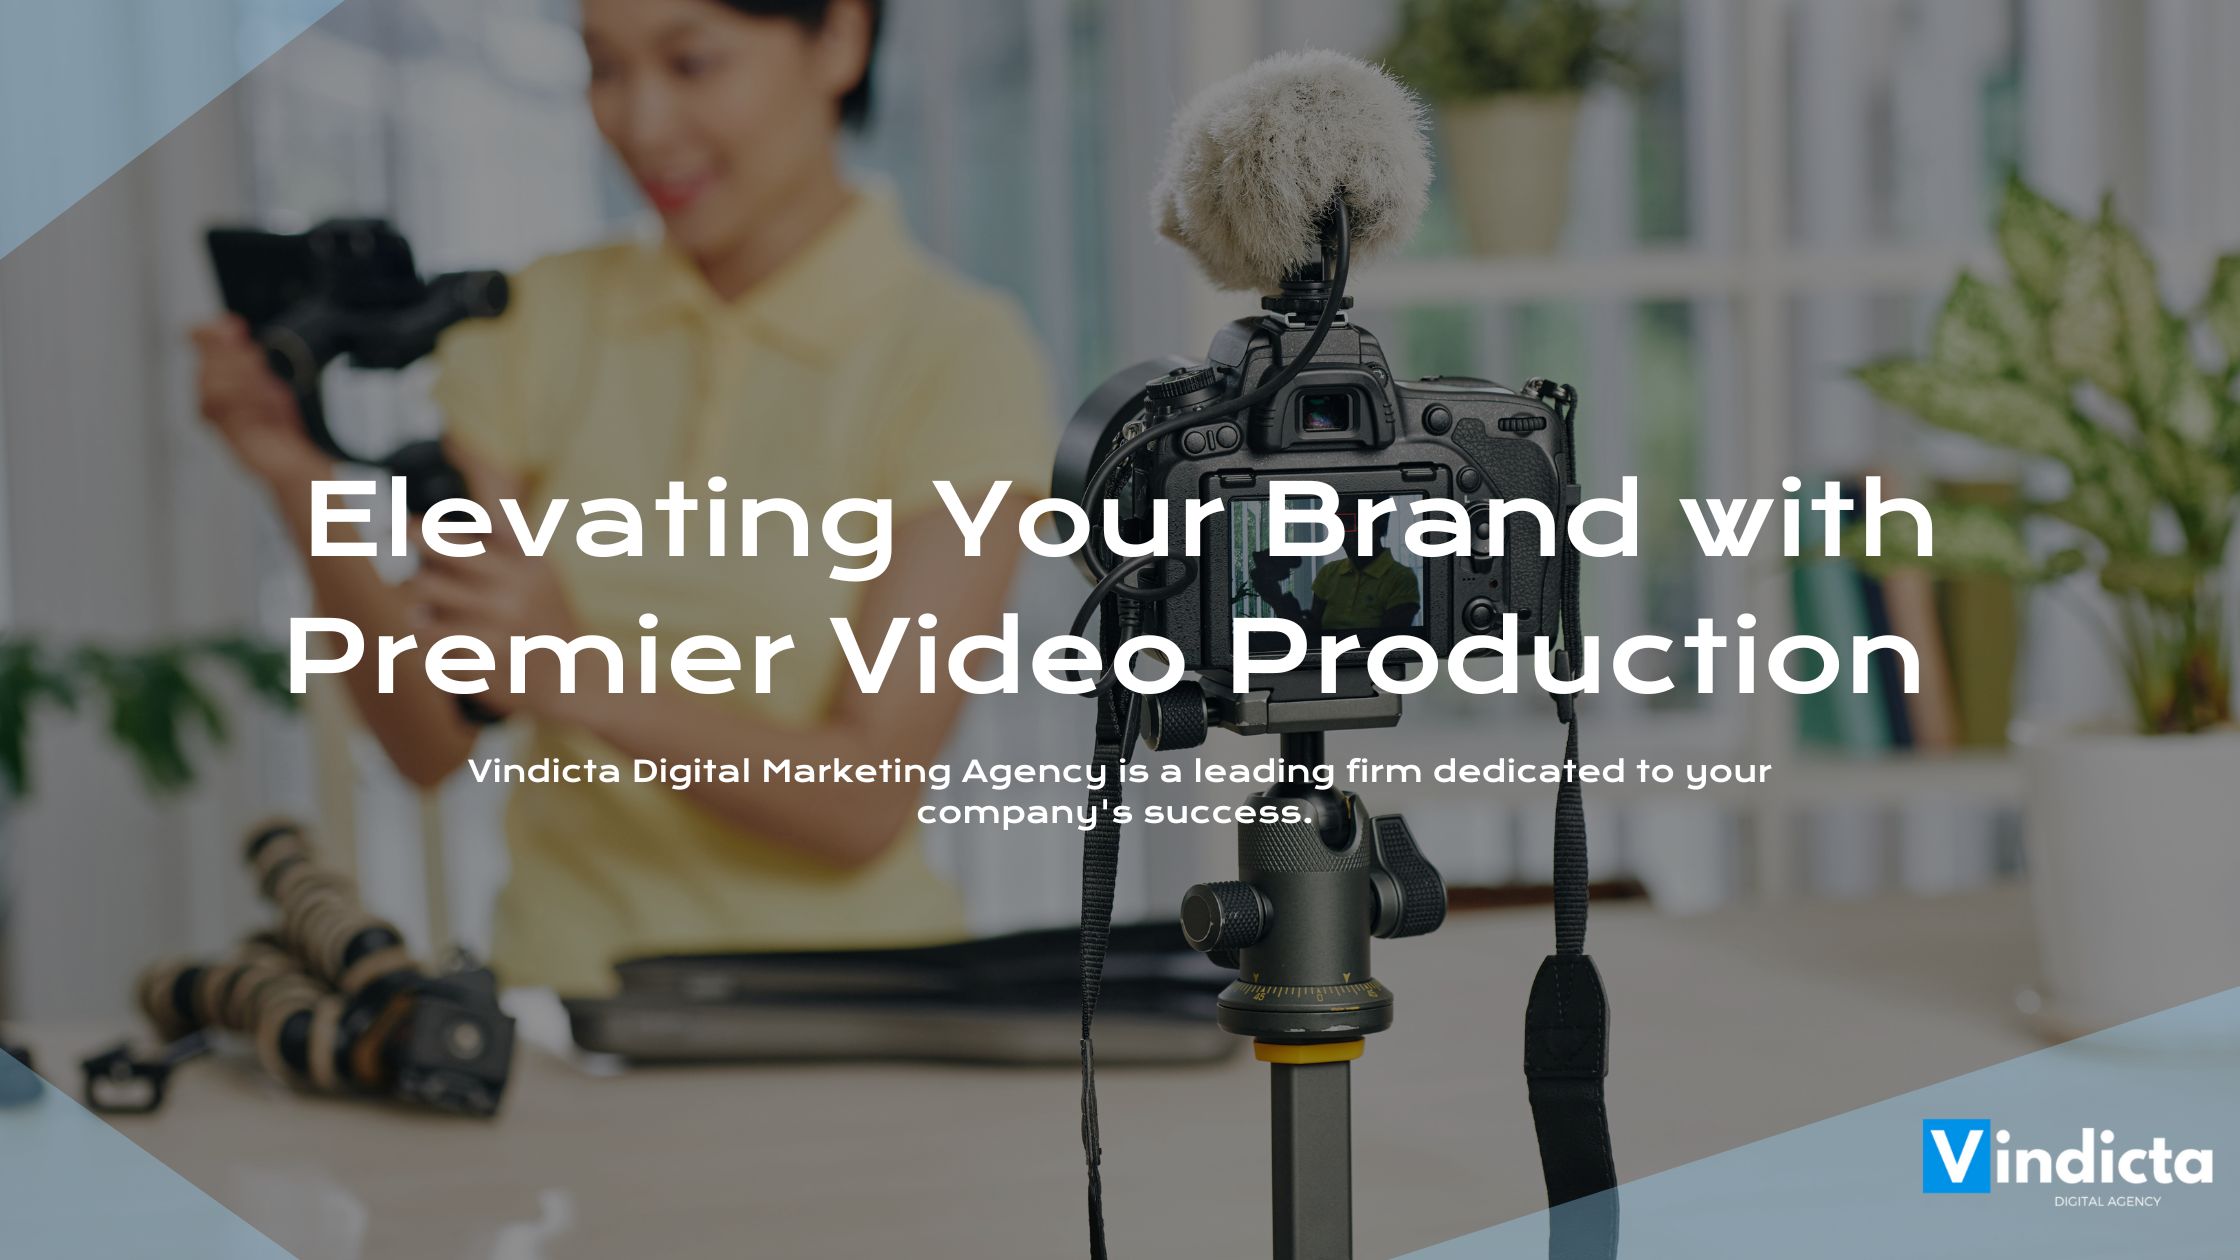 Elevating Your Brand with Manchester's Premier Video Production Services